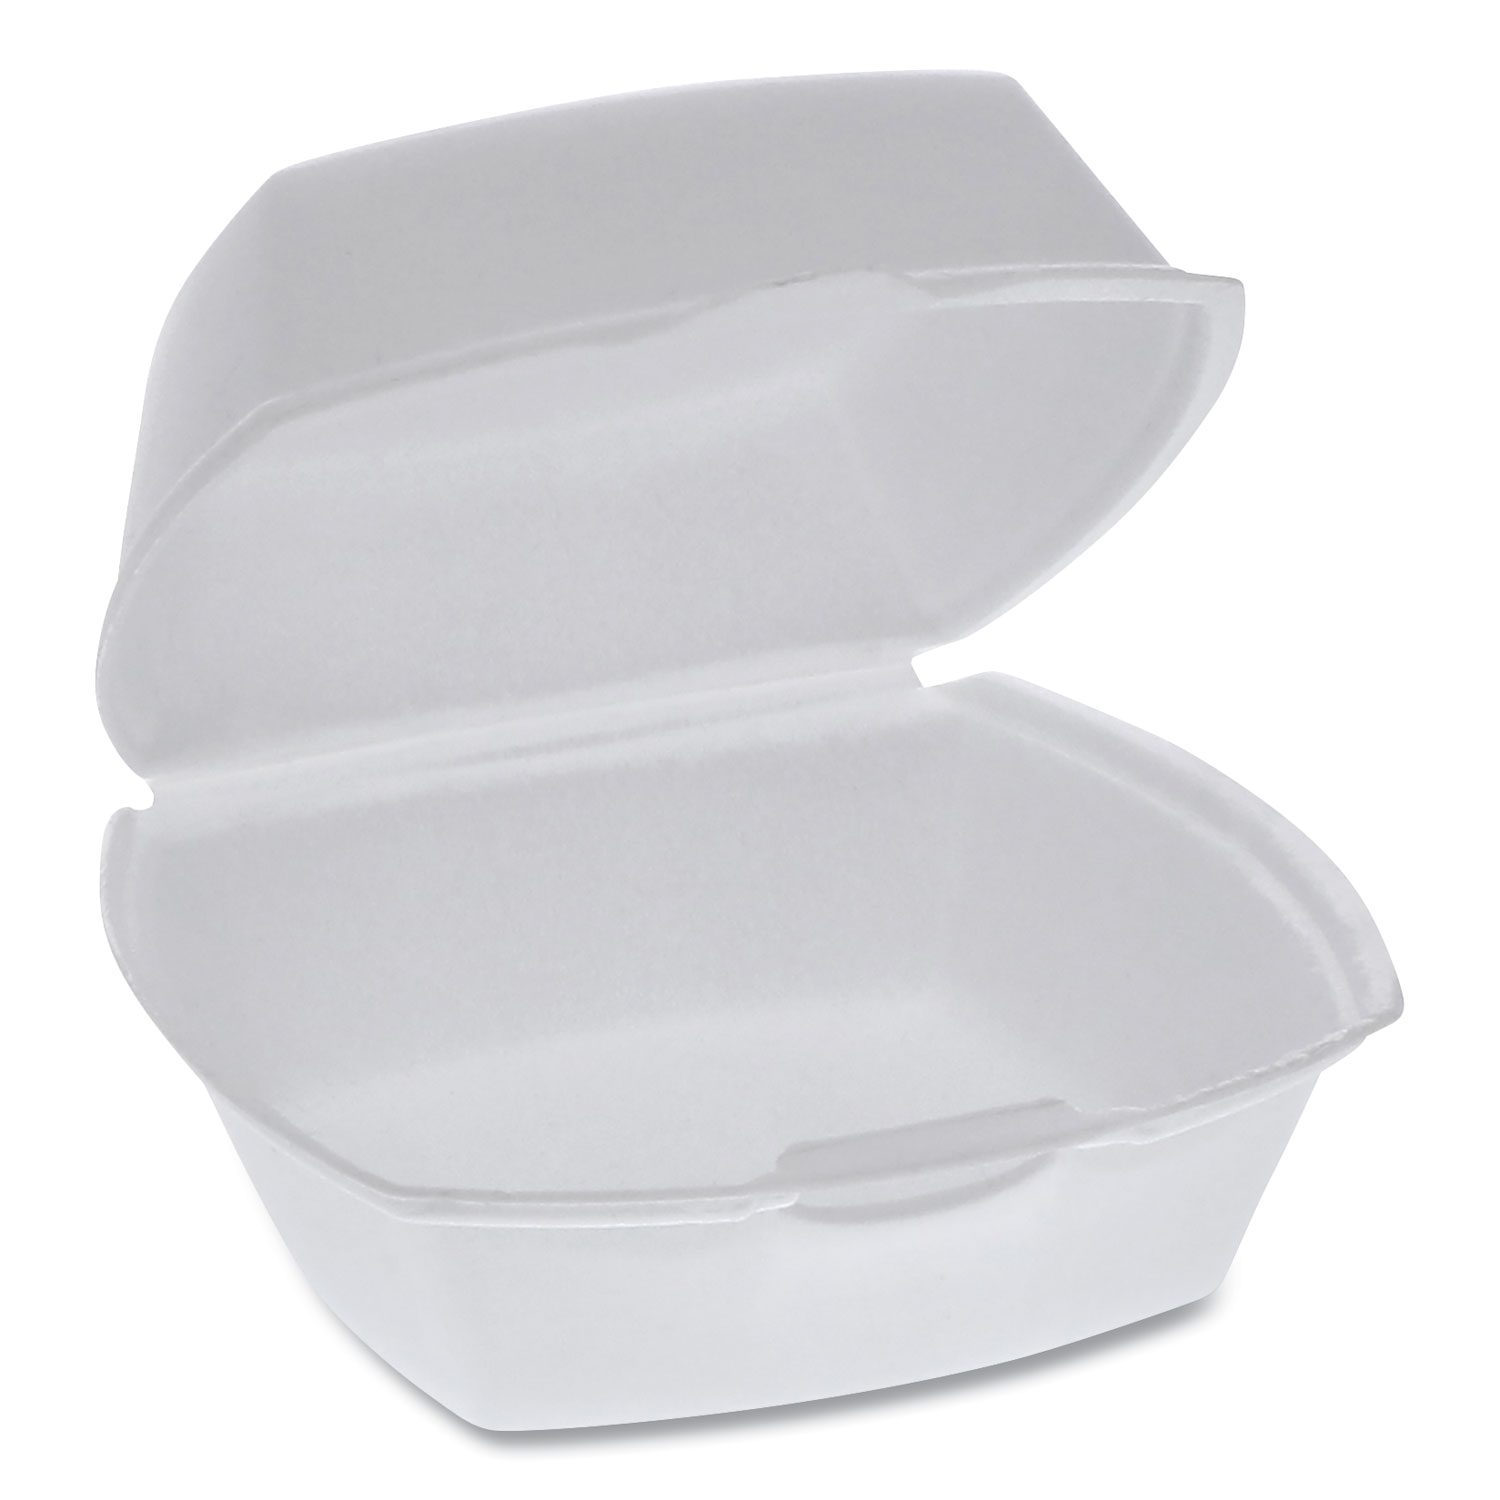 Pactiv Foam Hinged Lid Containers, Single Tab Lock, 5.13 x 5.13 x 2.5, 1-Compartment, White, 500/Carton